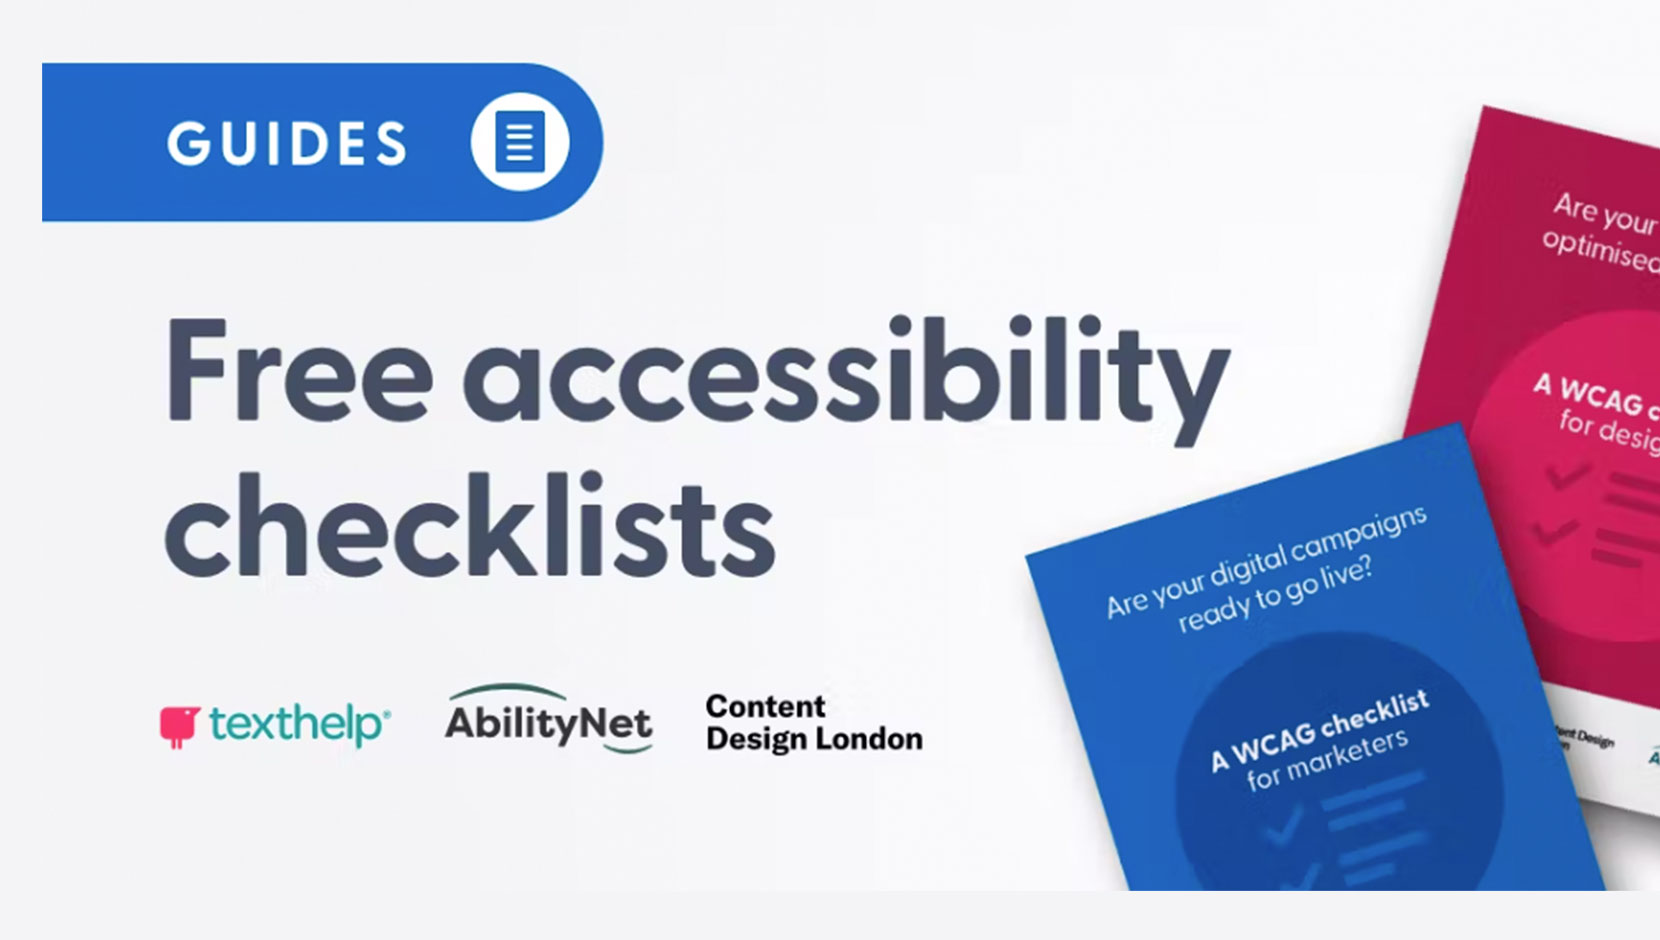 Advertisement of texthelp's WCAG Checklist documents. Text reads: Free accessibility checklists.